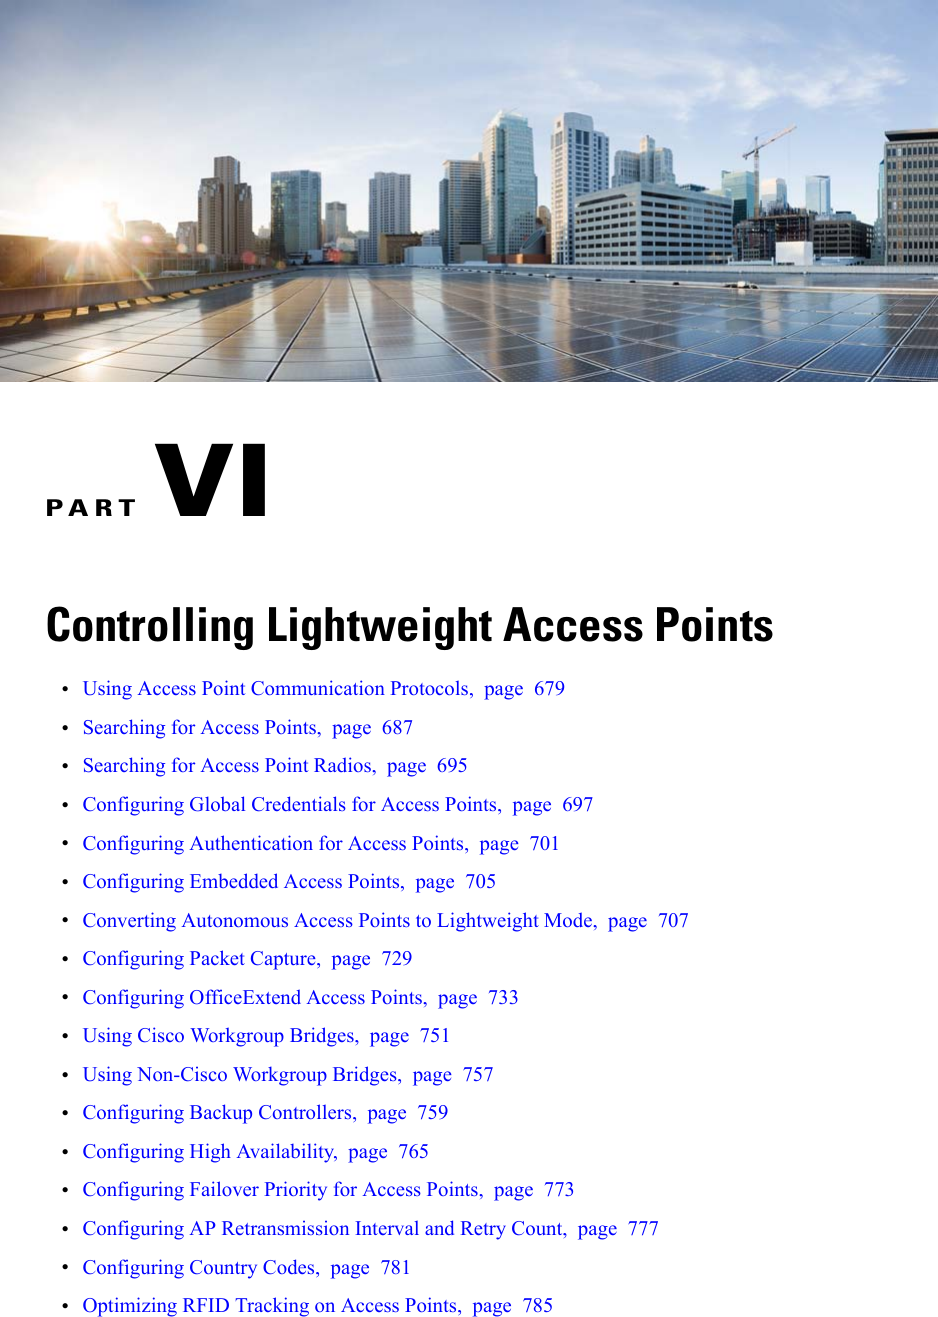 PART VIControlling Lightweight Access Points•Using Access Point Communication Protocols, page 679•Searching for Access Points, page 687•Searching for Access Point Radios, page 695•Configuring Global Credentials for Access Points, page 697•Configuring Authentication for Access Points, page 701•Configuring Embedded Access Points, page 705•Converting Autonomous Access Points to Lightweight Mode, page 707•Configuring Packet Capture, page 729•Configuring OfficeExtend Access Points, page 733•Using Cisco Workgroup Bridges, page 751•Using Non-Cisco Workgroup Bridges, page 757•Configuring Backup Controllers, page 759•Configuring High Availability, page 765•Configuring Failover Priority for Access Points, page 773•Configuring AP Retransmission Interval and Retry Count, page 777•Configuring Country Codes, page 781•Optimizing RFID Tracking on Access Points, page 785